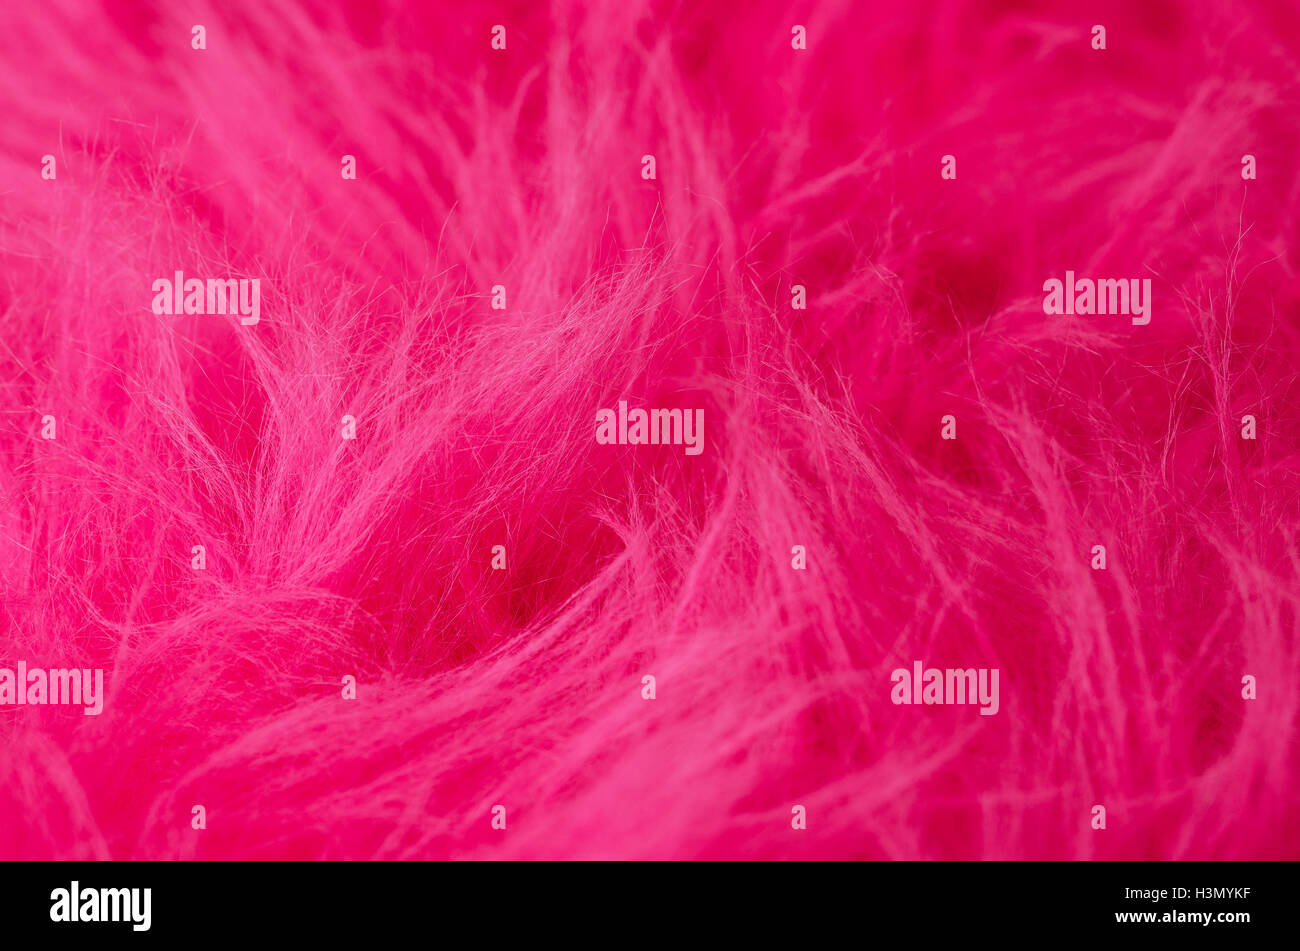 Pink plush fabric horizontal. Very soft polyester textile made of synthetic fibers with long hairs. Macro close up photo. Stock Photo